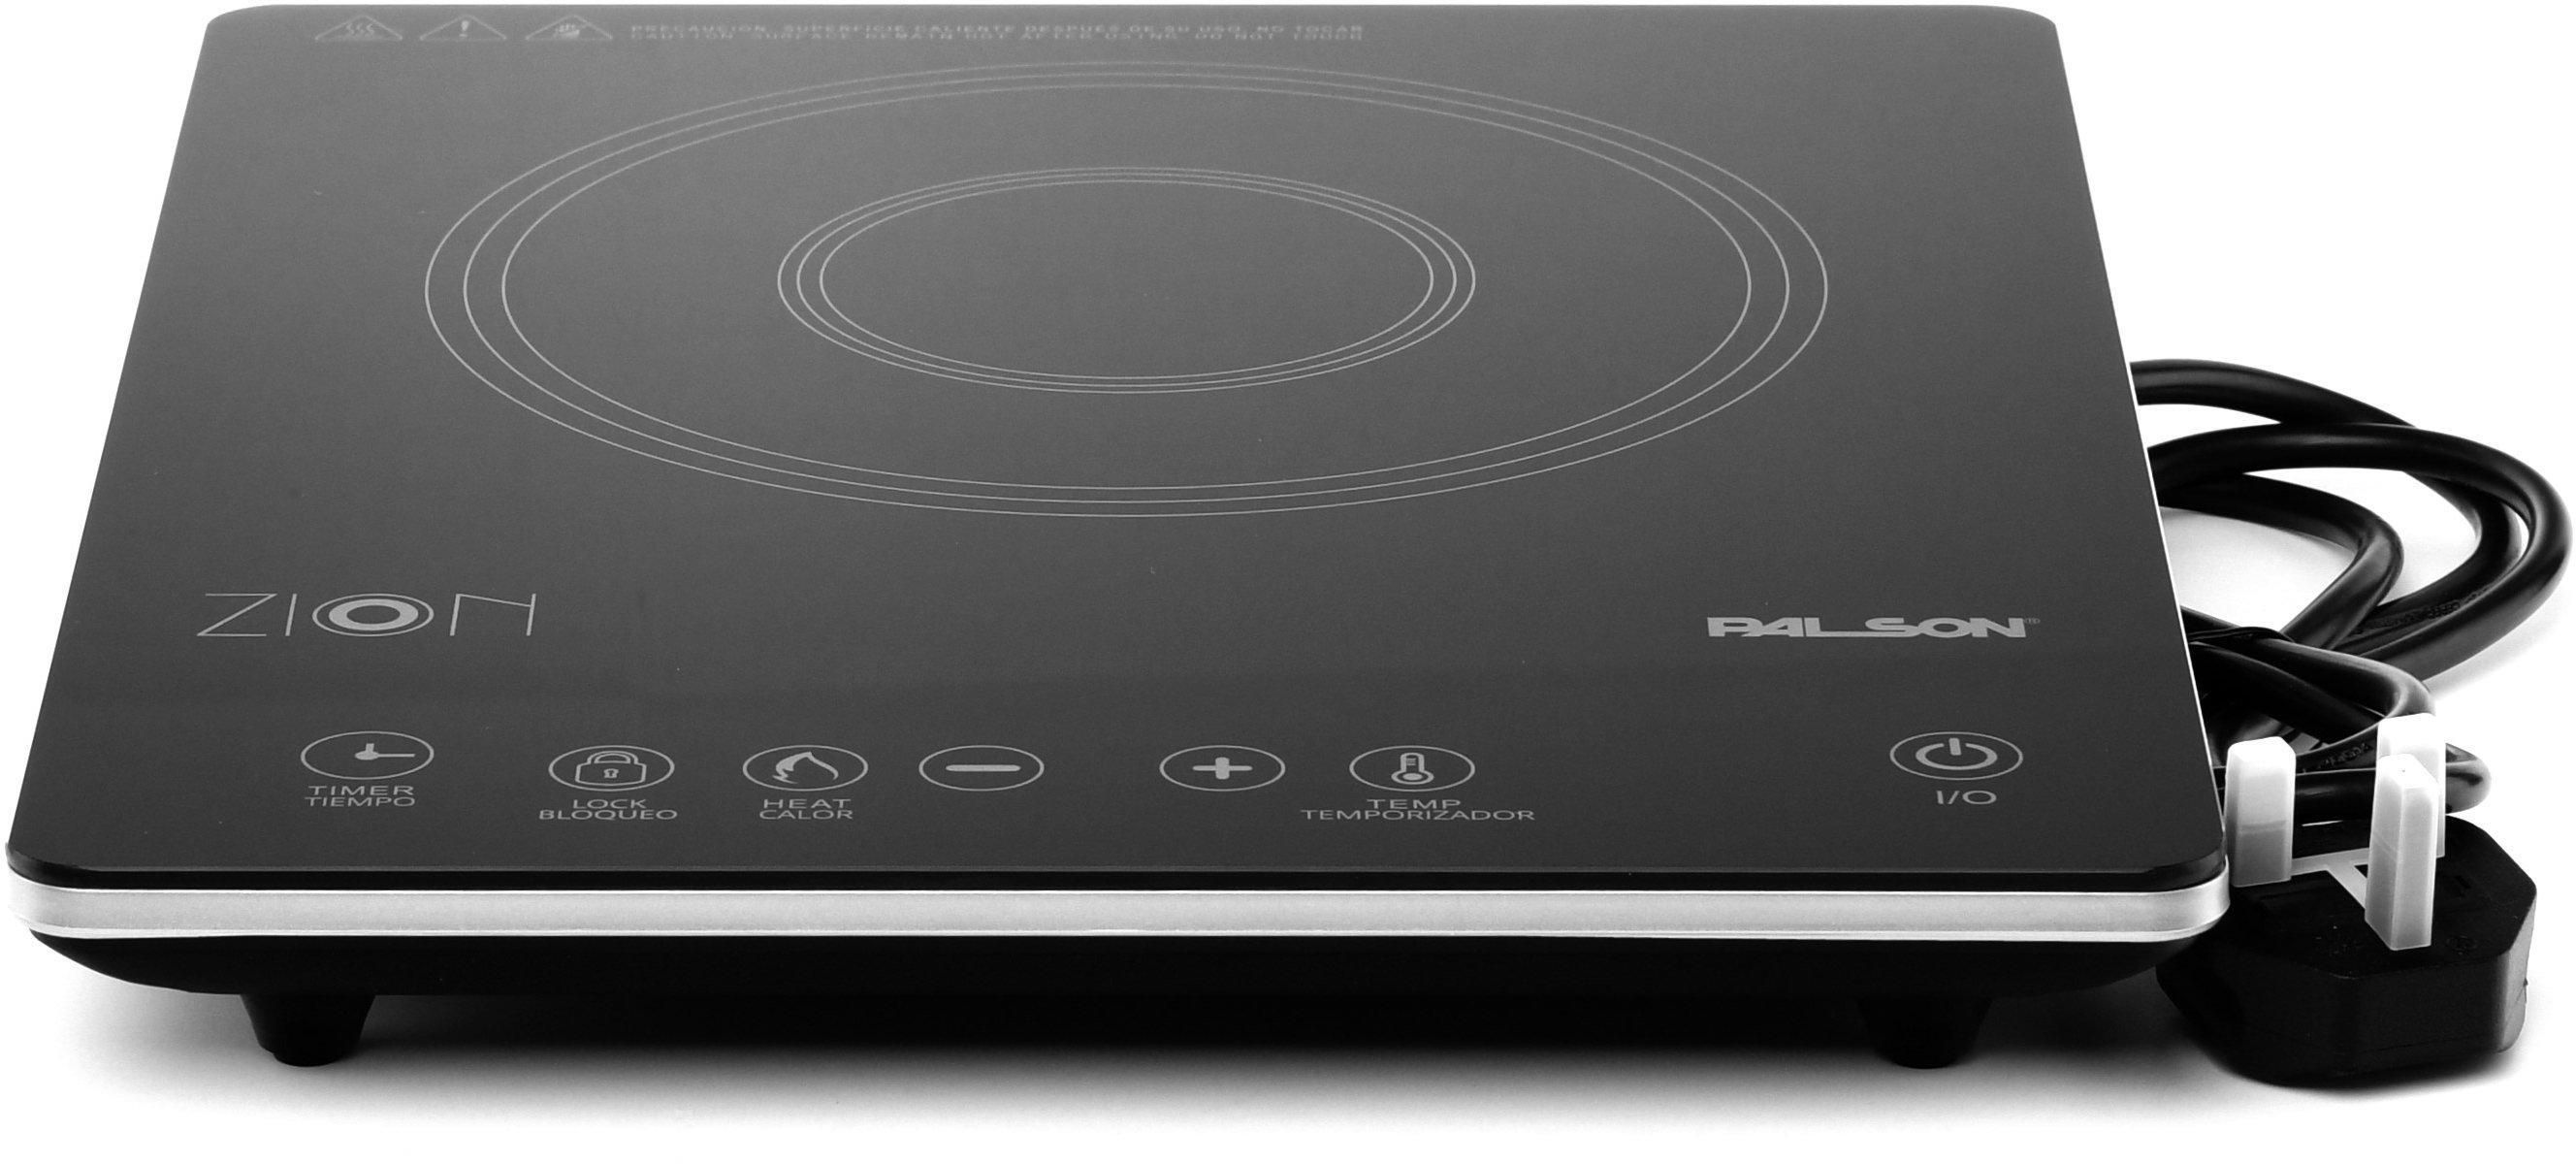 Palson Zion Single Induction Cooker, Special scratch-resistant, Black glass surface